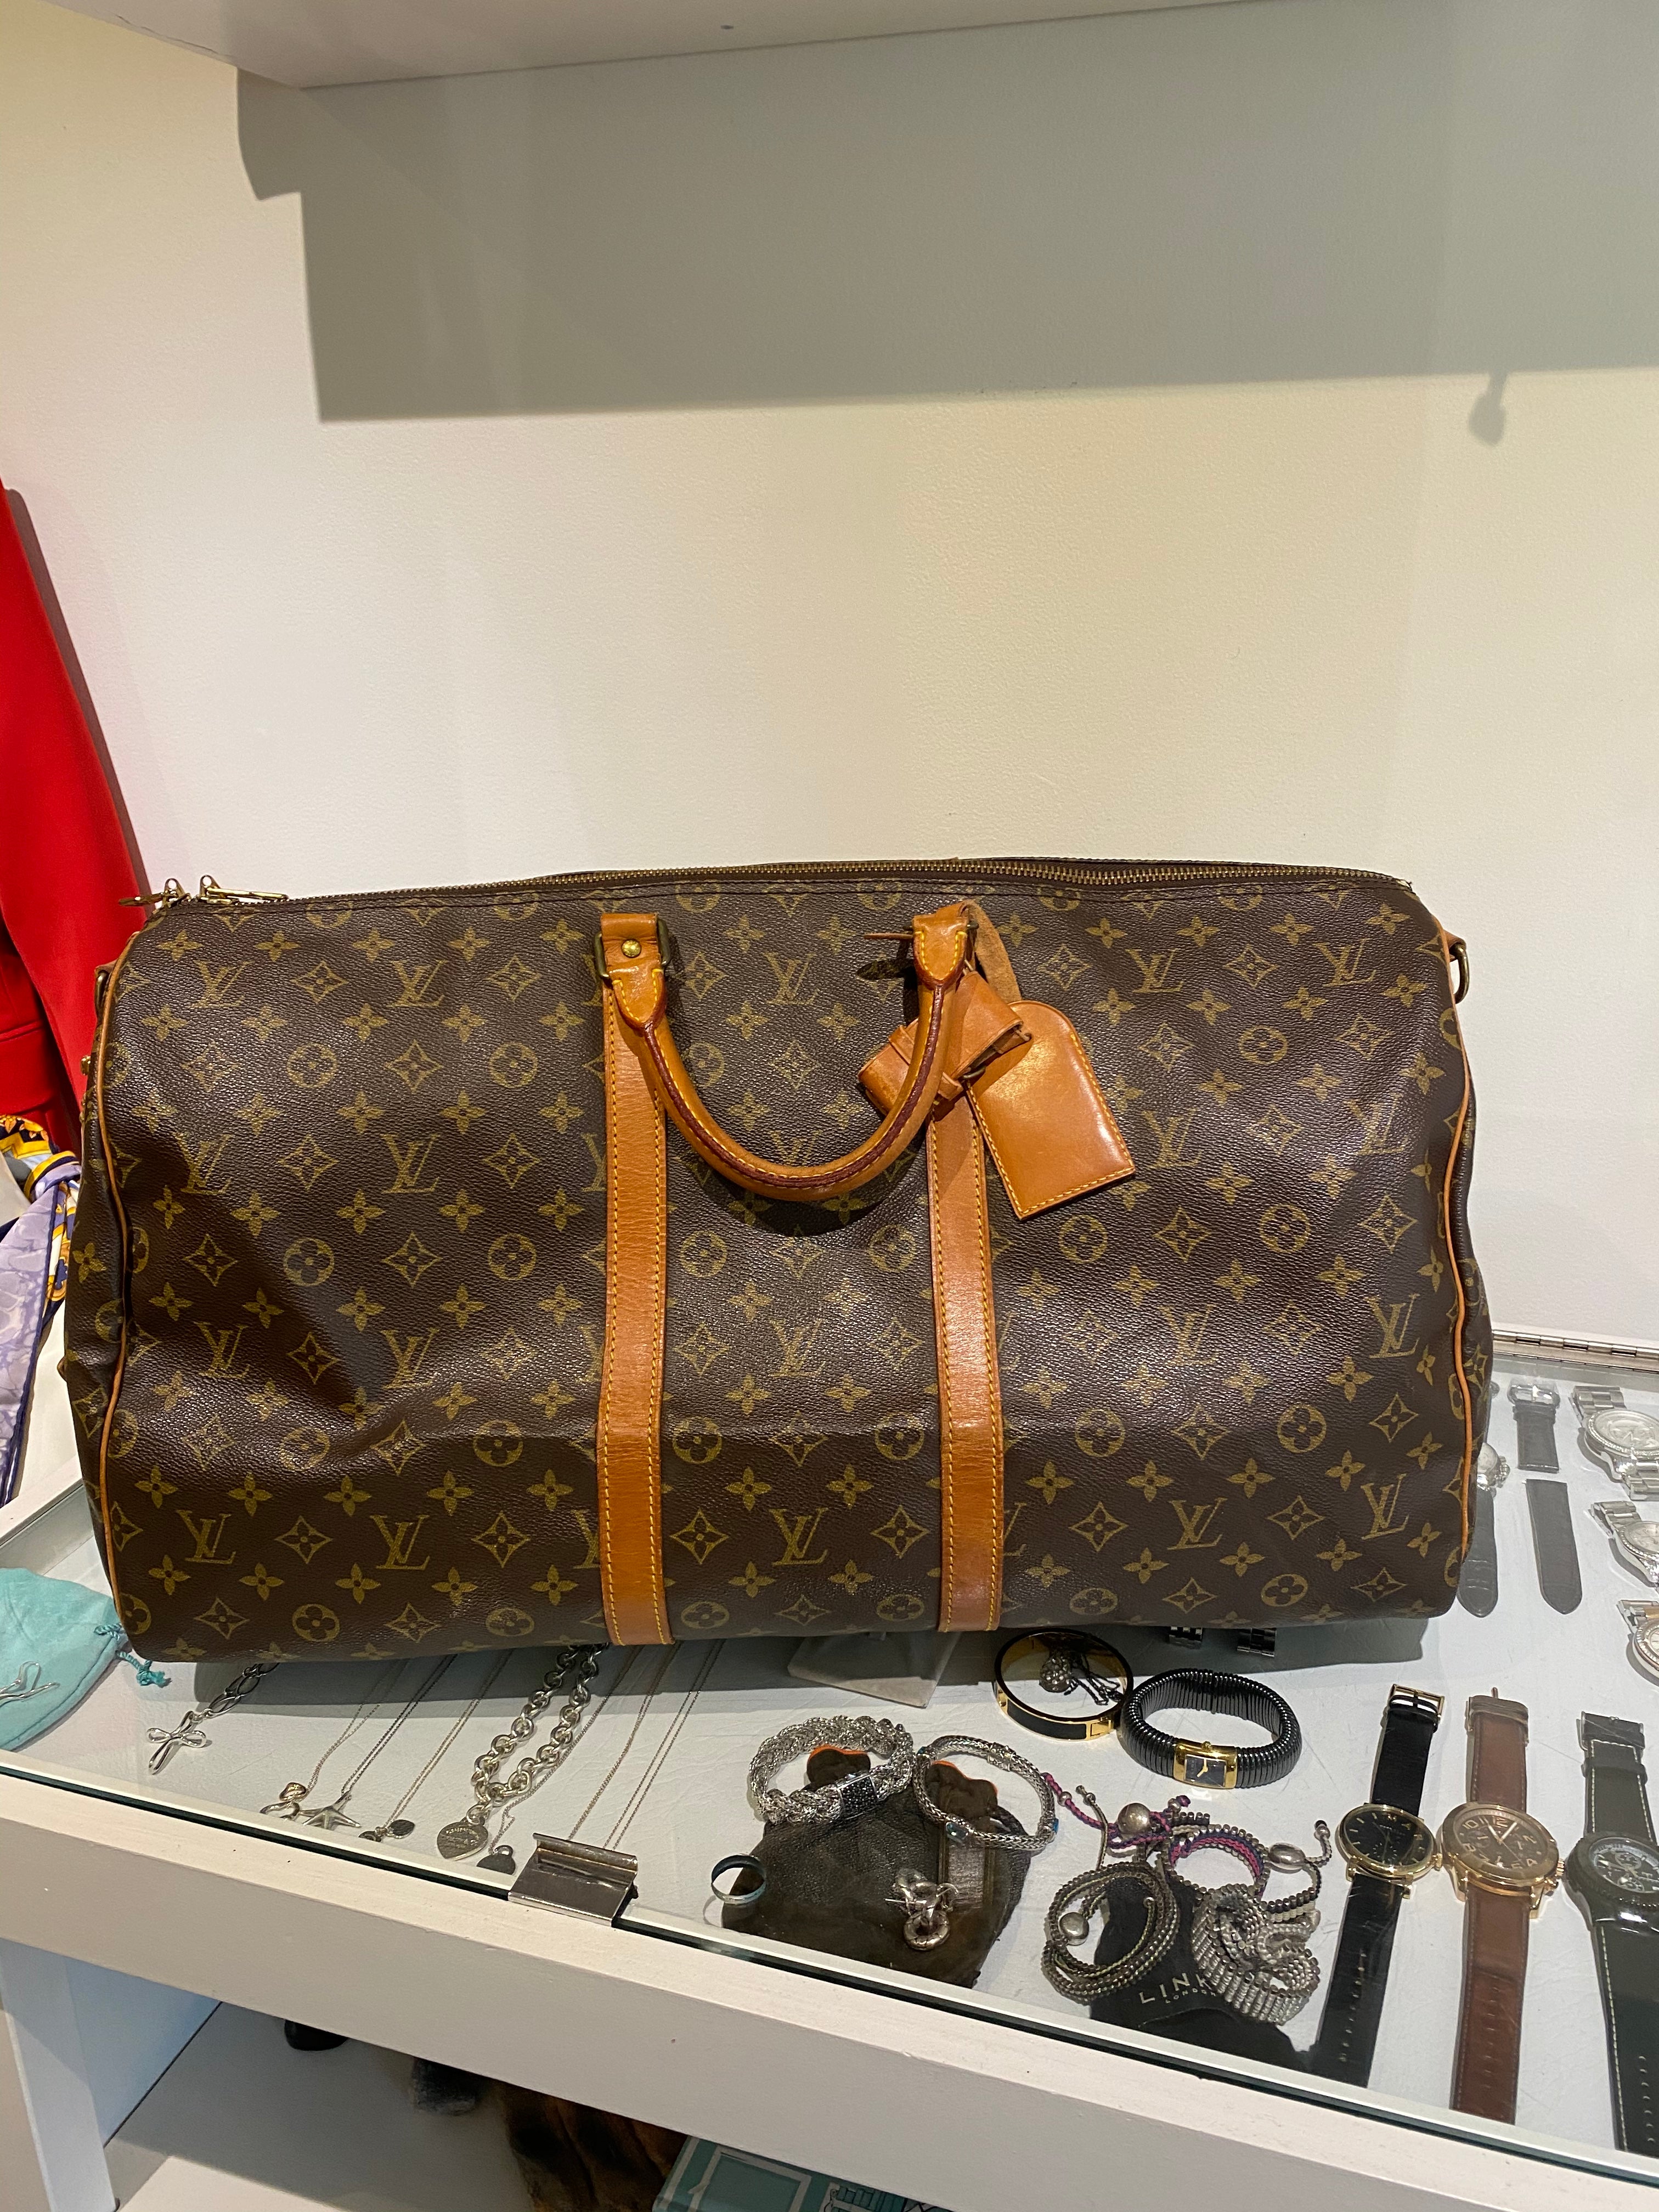 New Vintage x Louis Vuitton Speedy 35 with HandPainted Blue and White LV  Monogram Spades  Etc